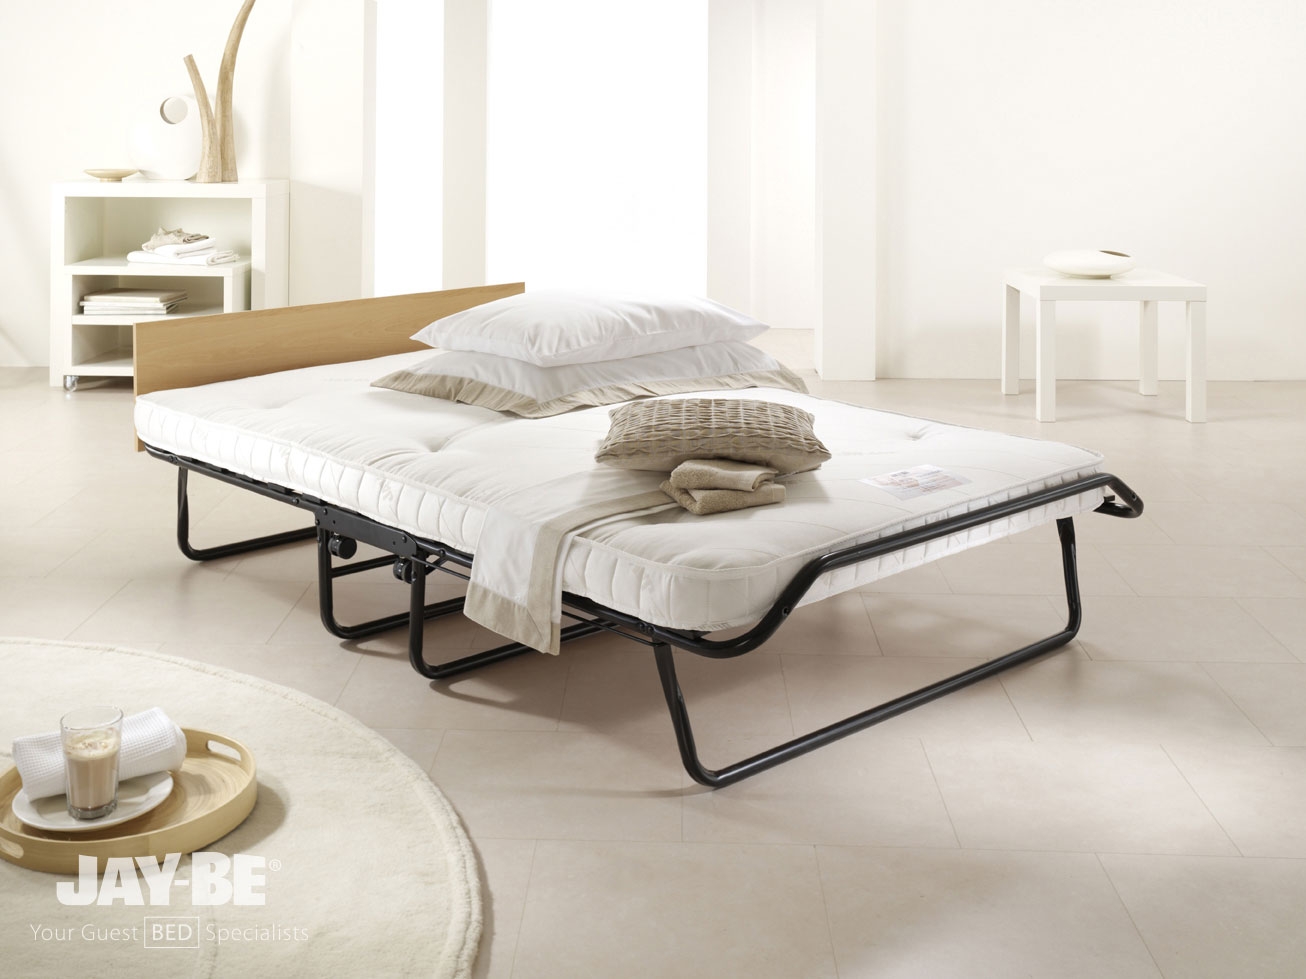 Jay-Be Royal Pocket Sprung Double Folding Bed